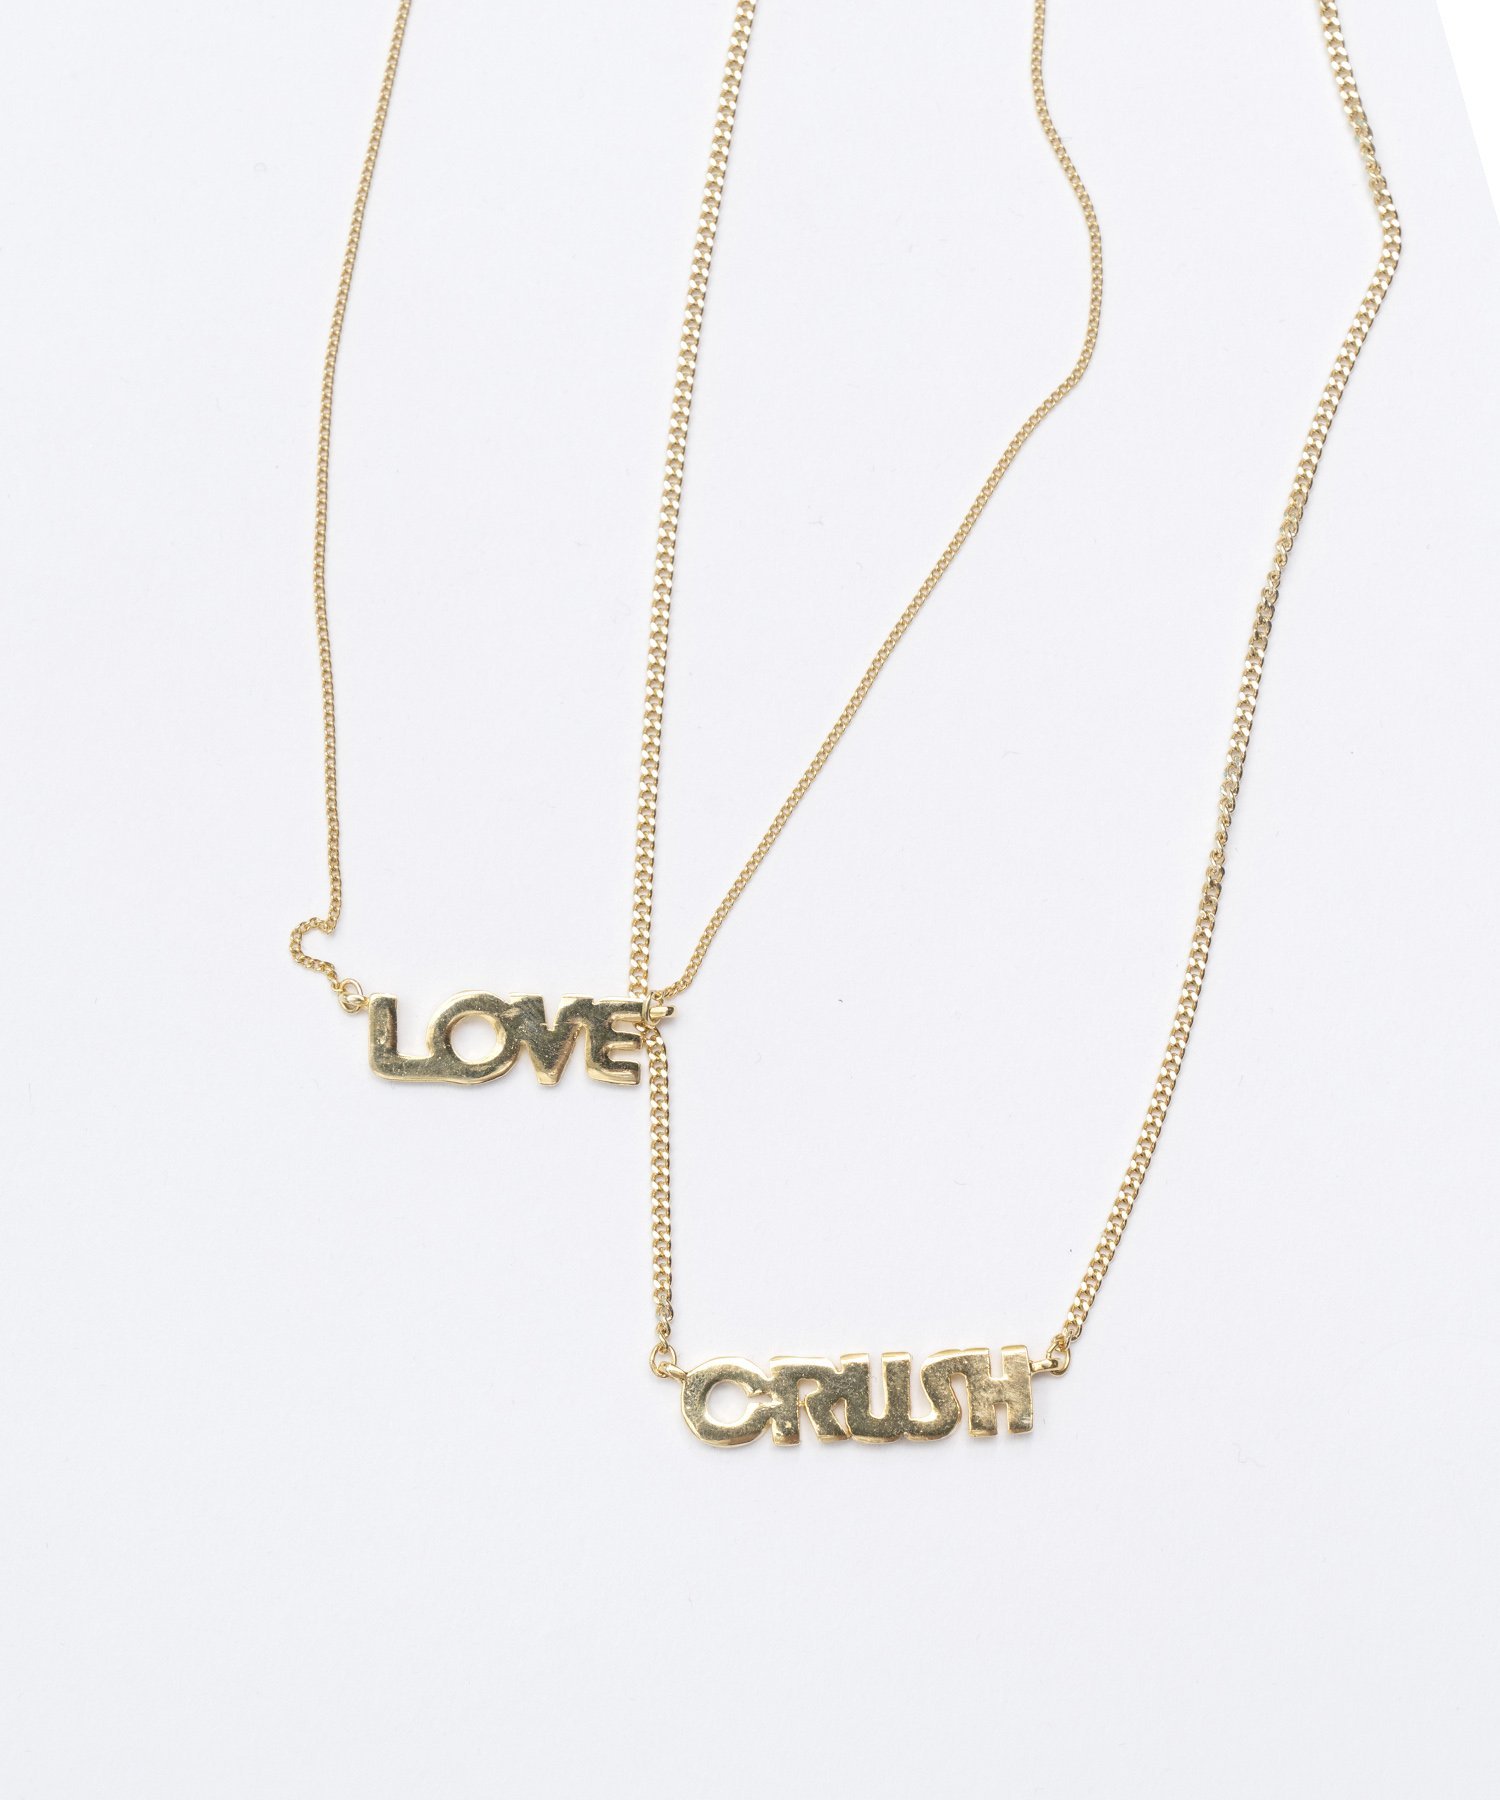 LOVE CRUSH Necklace/LOVE CRUSHネックレス【MAISON SPECIAL